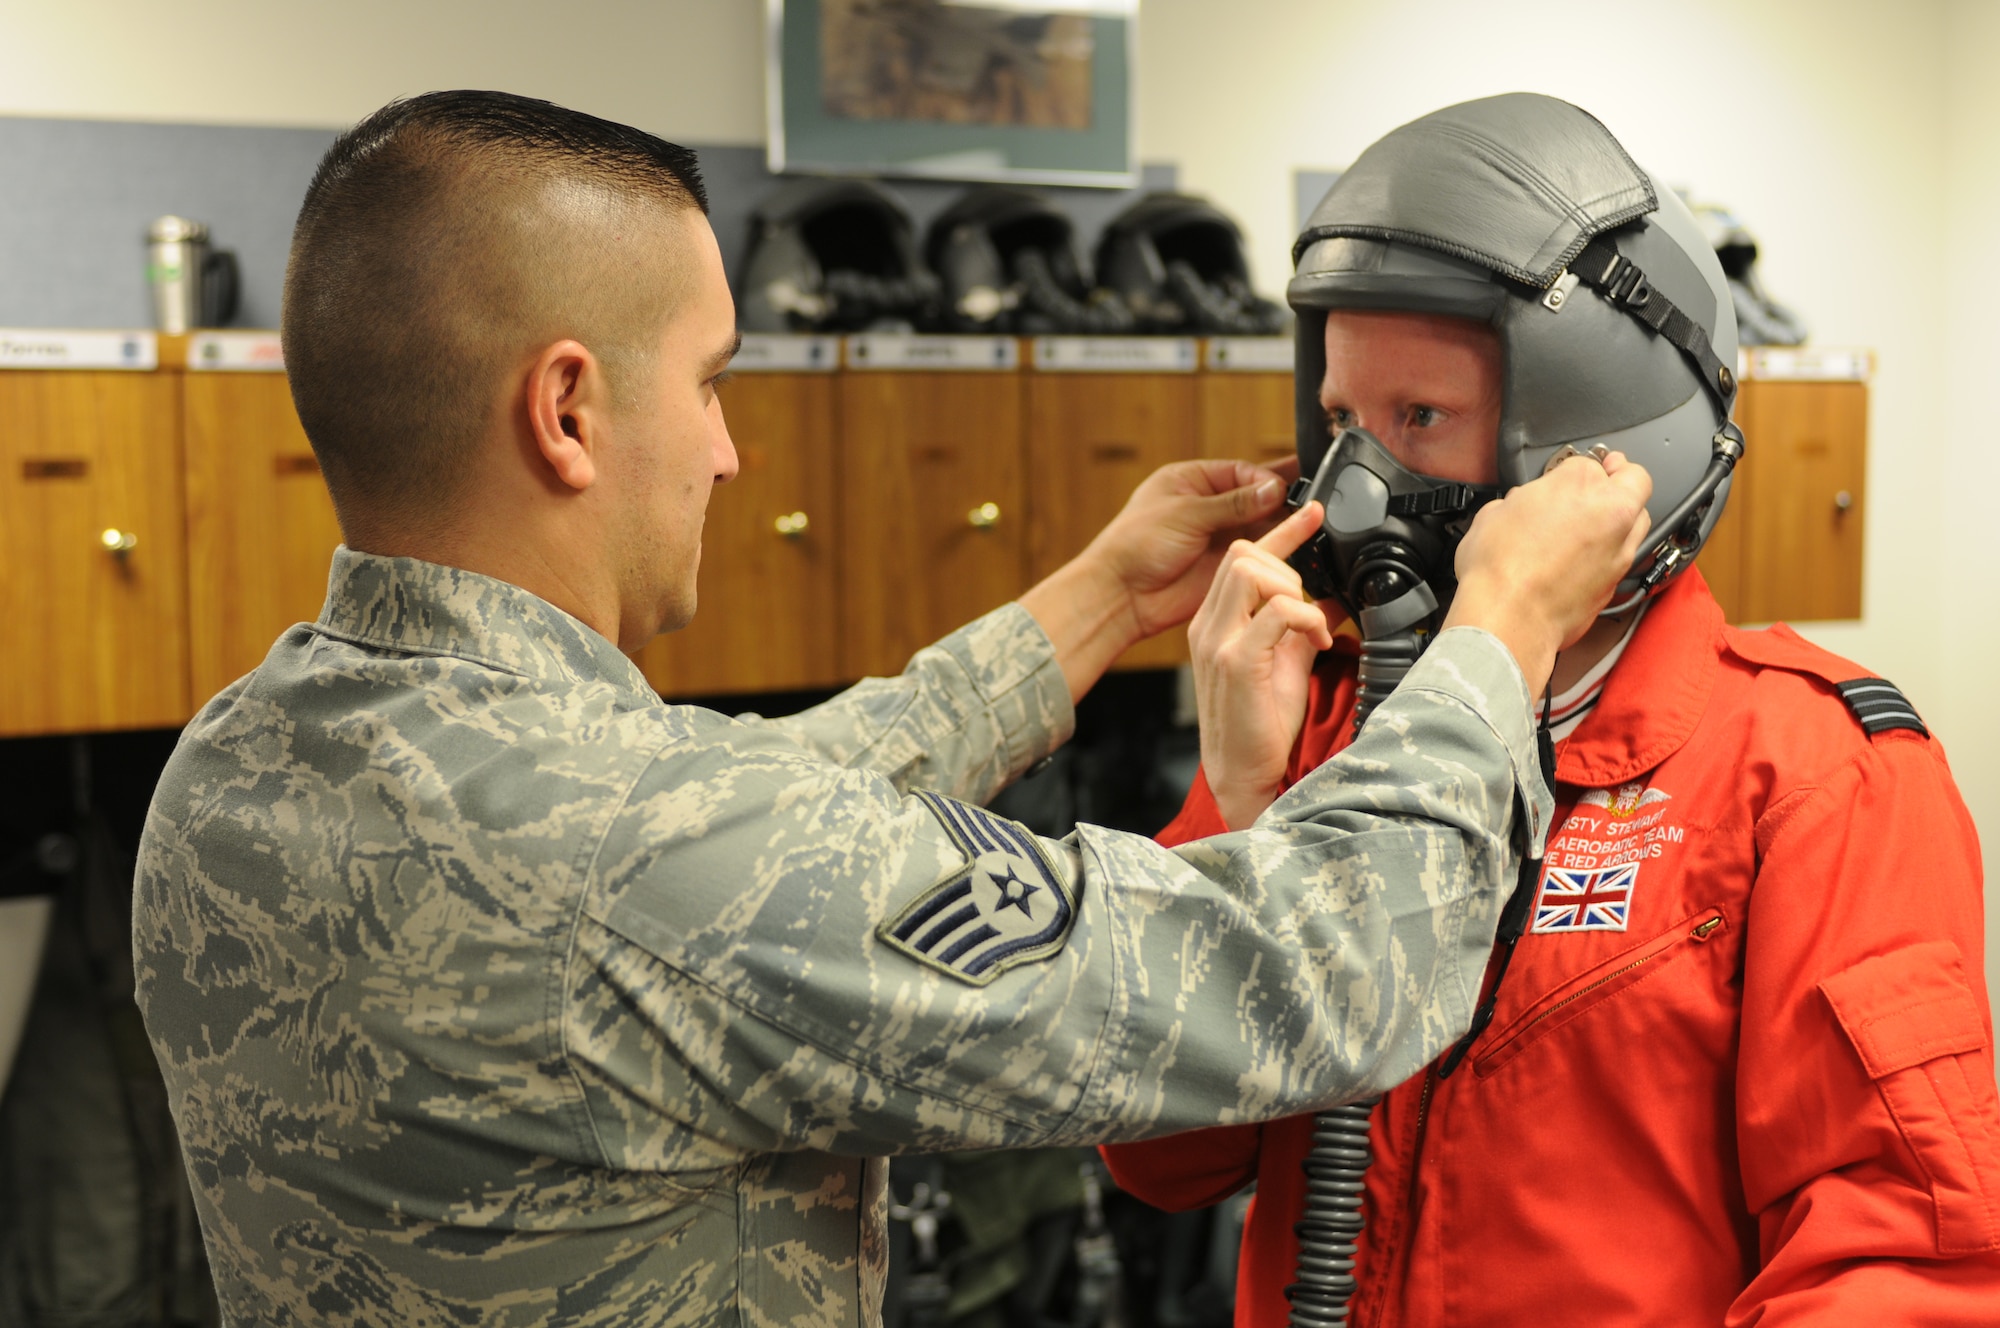 Staff Sgt. Luis Aguilar fits RAF Flight Lt. Kirsty Stewart with a helmet and oxygen mask in preparation for her F-16 orientation flight at the 162nd Fighter Wing at Tucson International Airport. Stewart, a member of the United Kingdom’s Red Arrows aerial demonstration team, flew with the international F-16 training wing, Oct. 21.  (U.S. Air Force photo/Maj. Gabe Johnson)